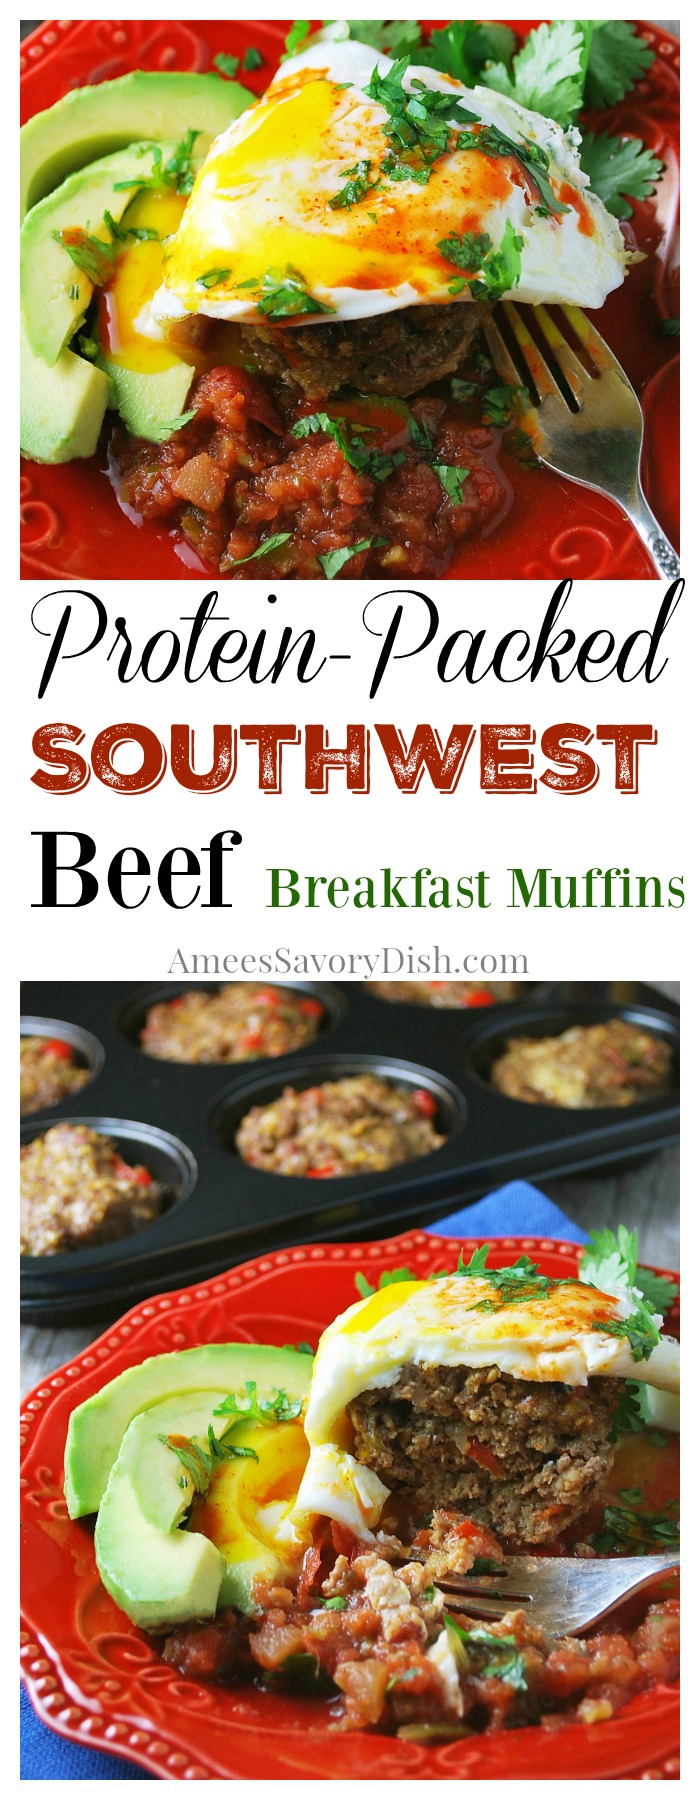 Protein Packed Southwest Beef Breakfast Muffins